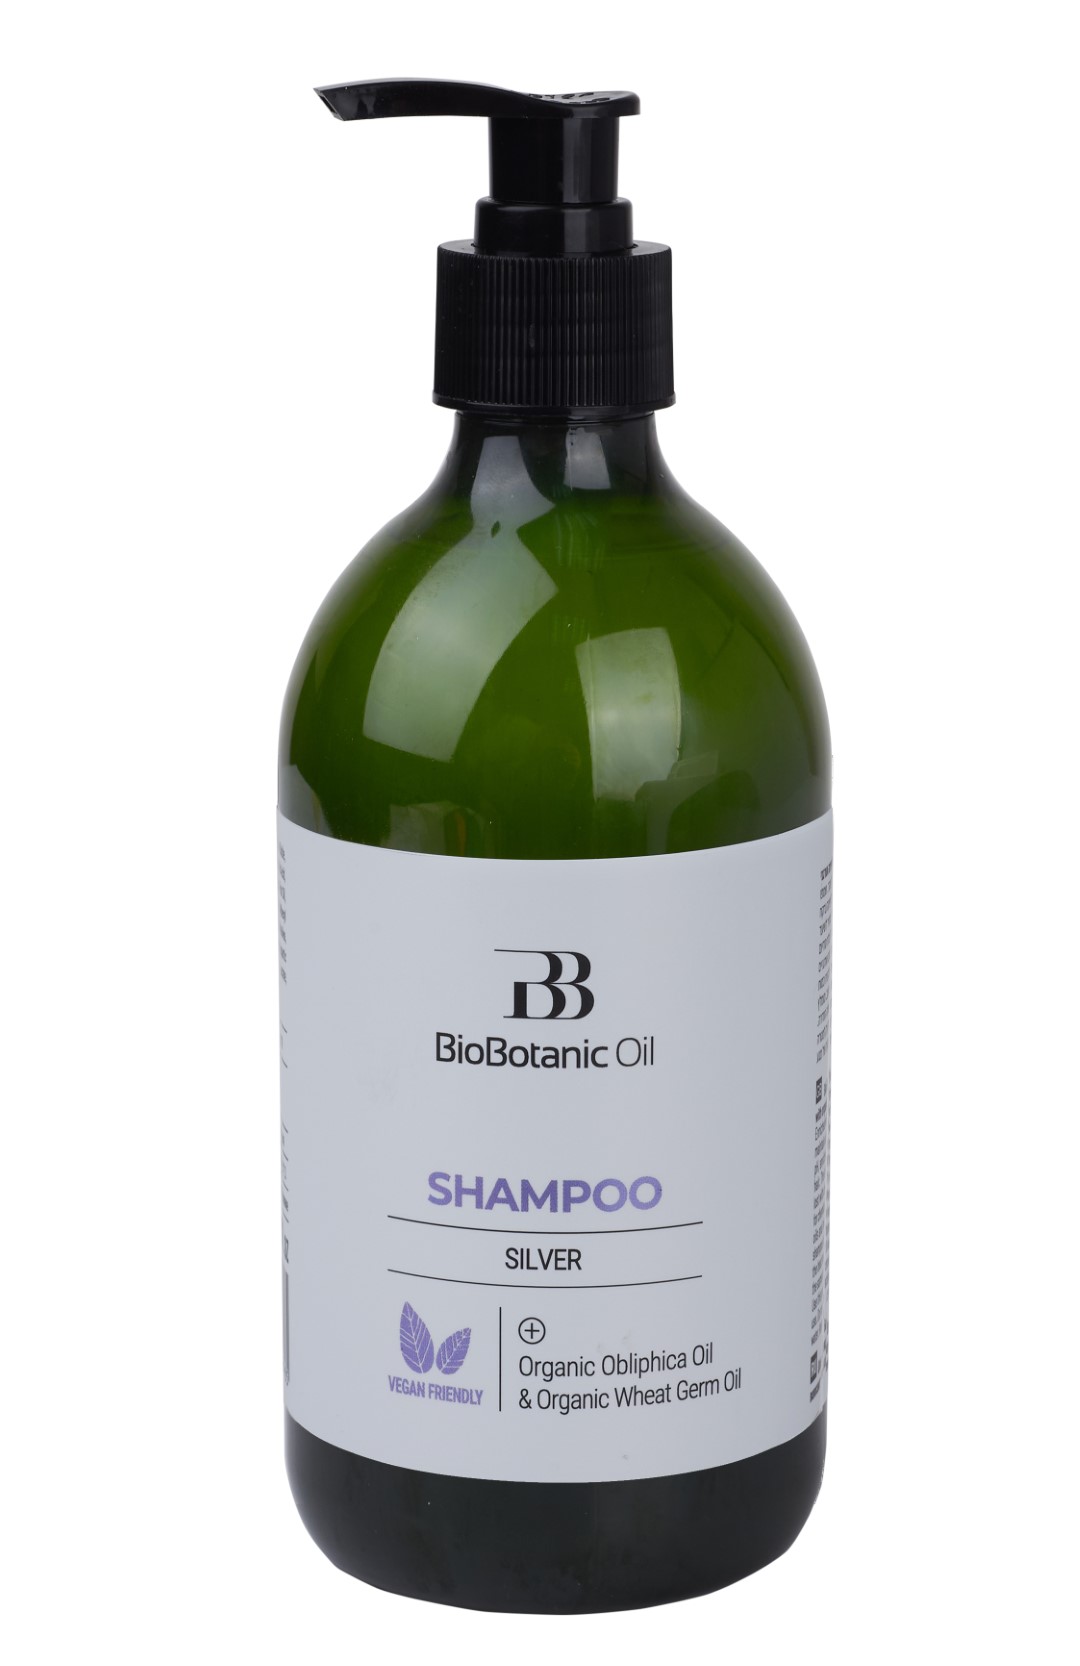 SILVER shampoo for blonde and lightened hair